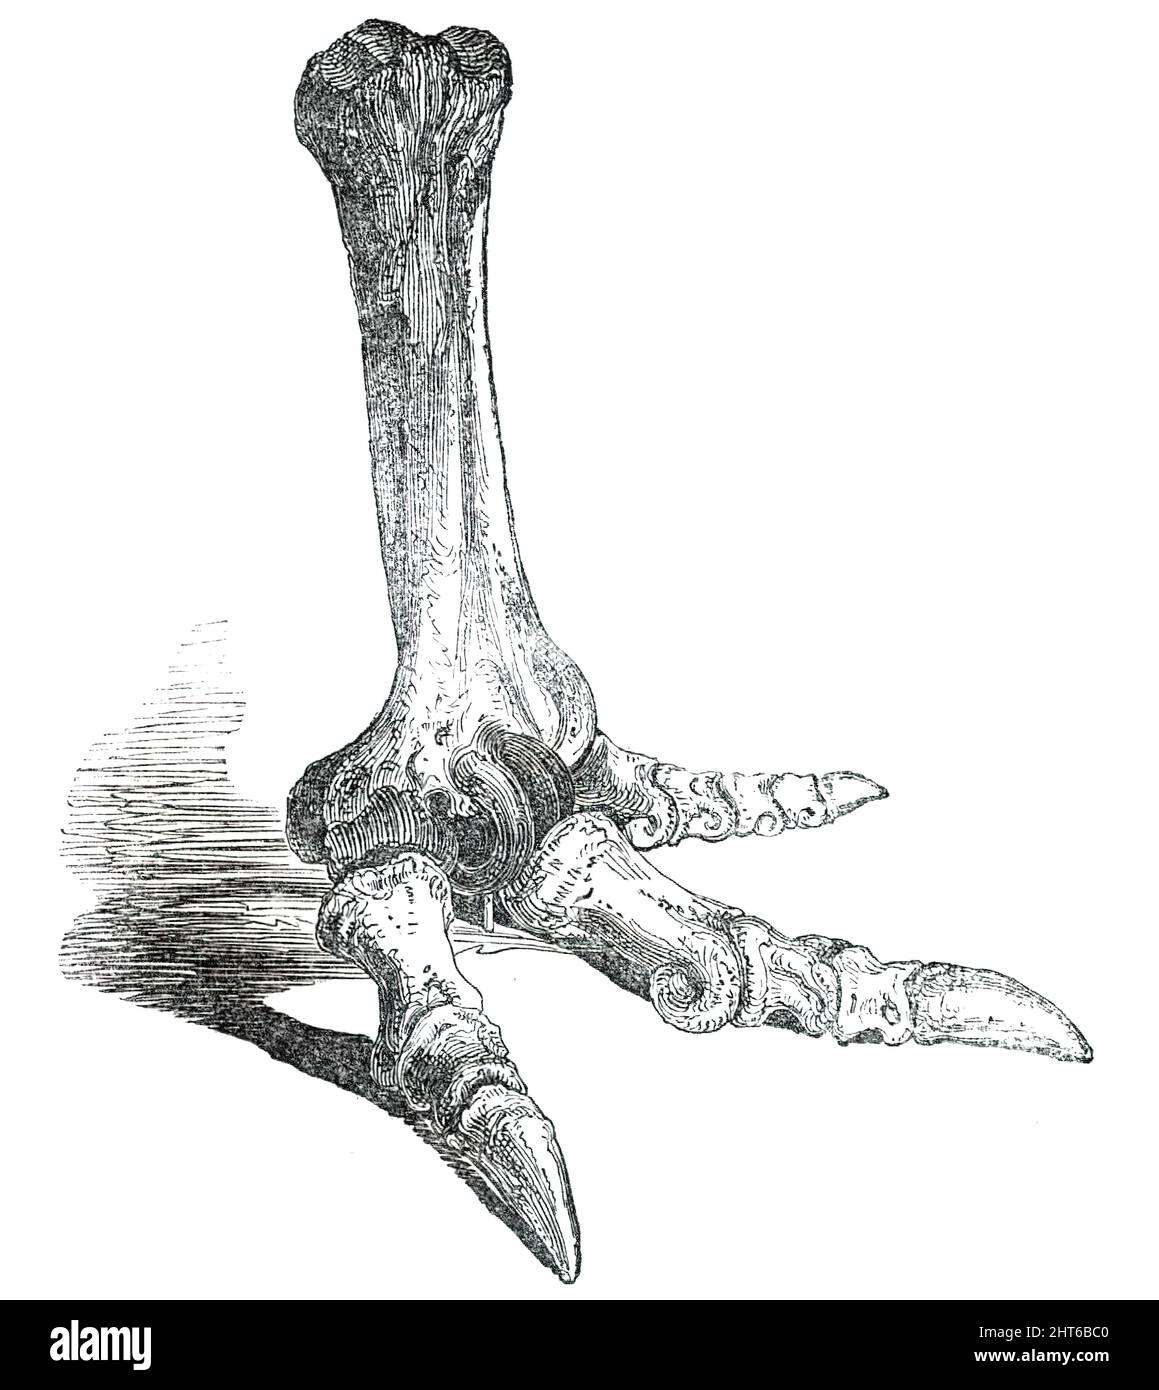 Fossil Foot of  Dinornis, 1850. Lecture by Gideon Algernon Mantell on the extinct gigantic birds of New Zealand. 'The most extraordinary relics obtained from this spot were the entire series of bones ot the shanks and feet (twenty-six in number) of the same individual tridactyle (three-toed) bird...The toes present the characteristic number of bones observable in birds: thus the inner toe has 3 bones; middle, 4; the outer toe 5; had there been a hinder toe that would have consisted of but 2 bones. The foot, when recent, with the cartilages, claws, &amp;c., must have been 16 inches long and 18 Stock Photo